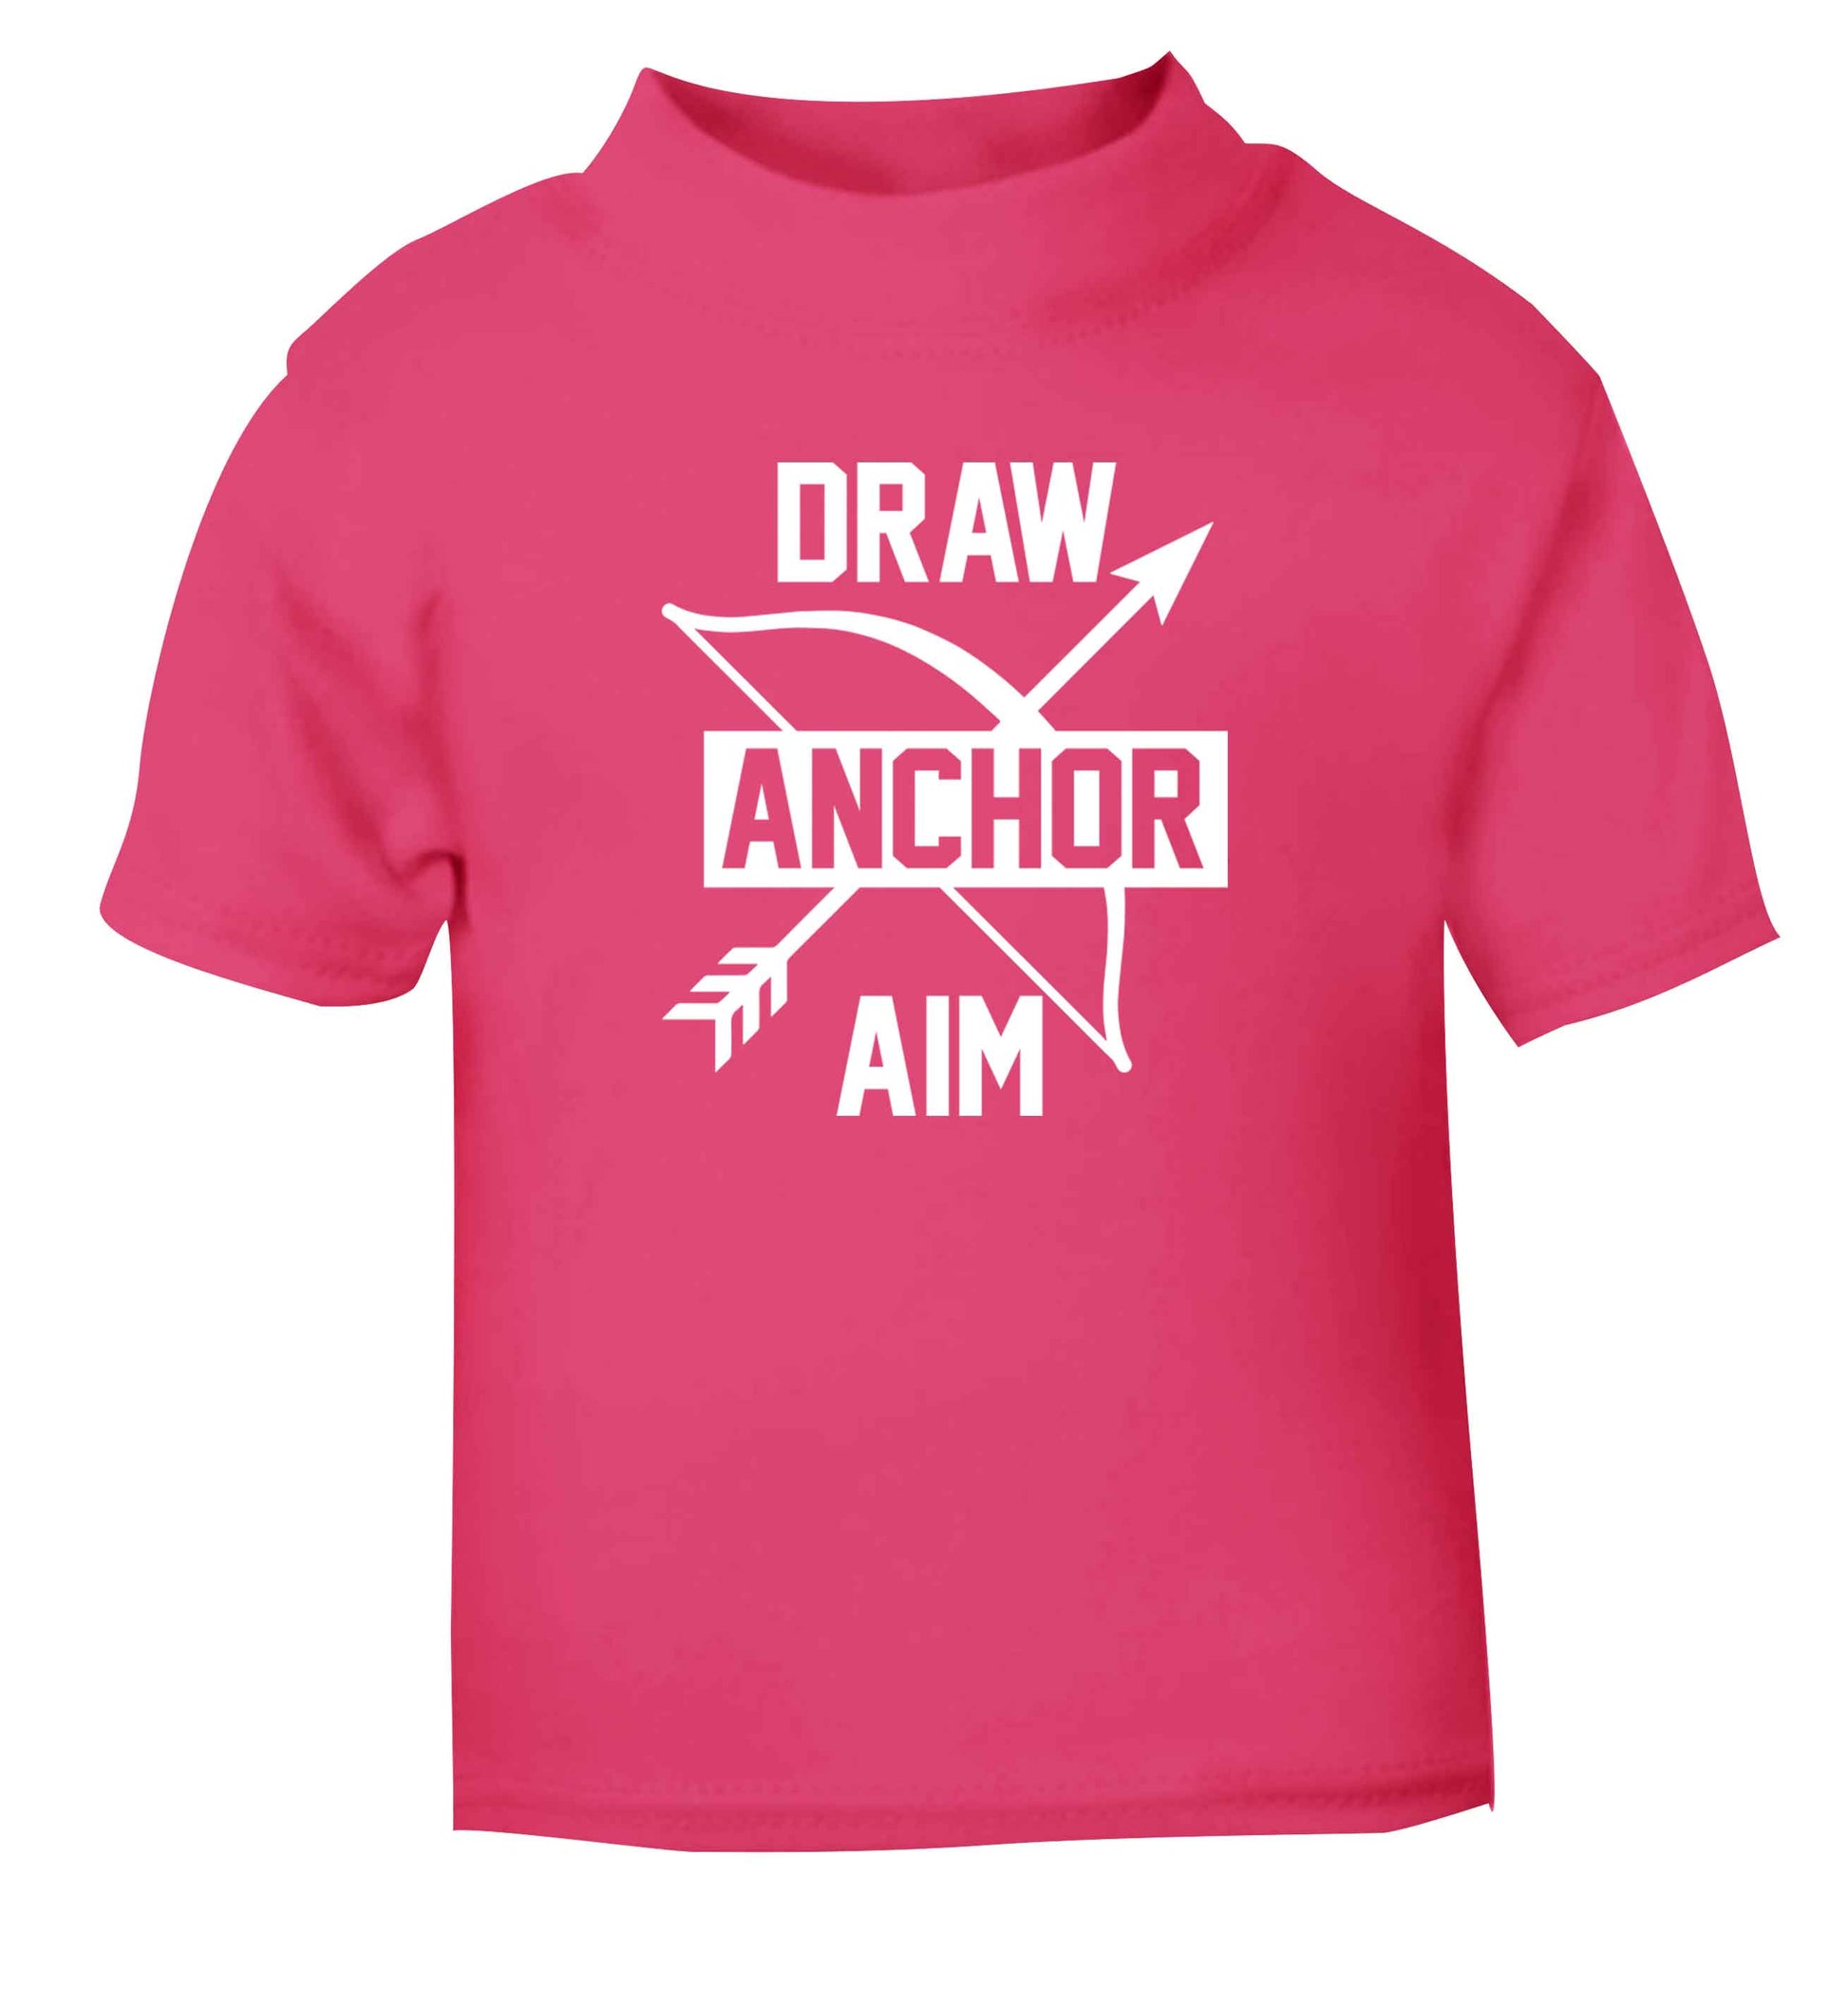 Draw anchor aim pink Baby Toddler Tshirt 2 Years